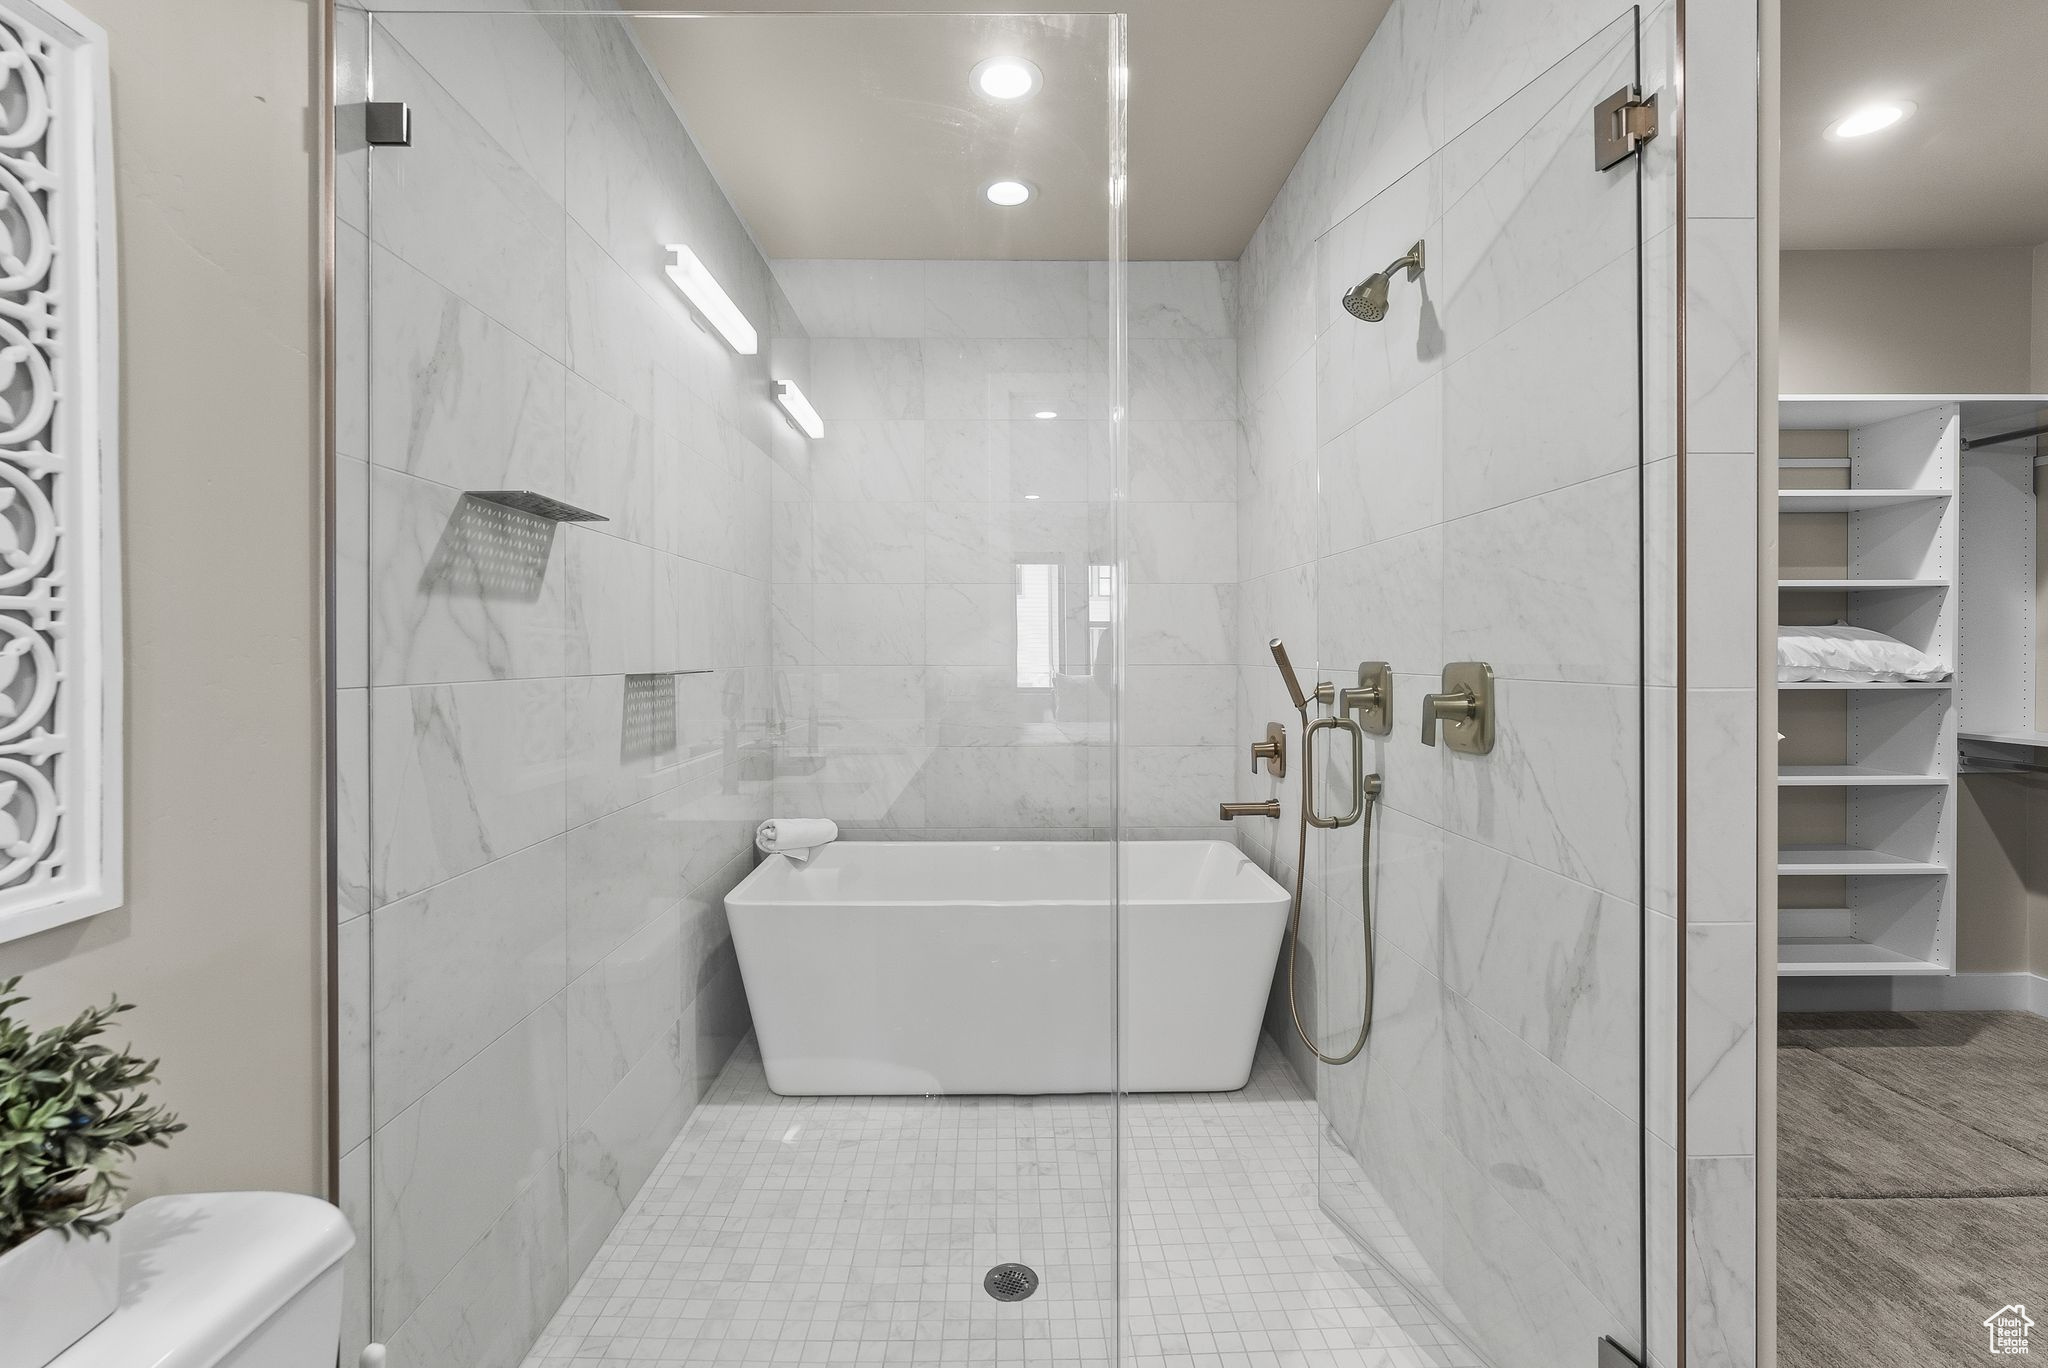 Bathroom featuring tile walls, tile floors, toilet, and separate shower and tub